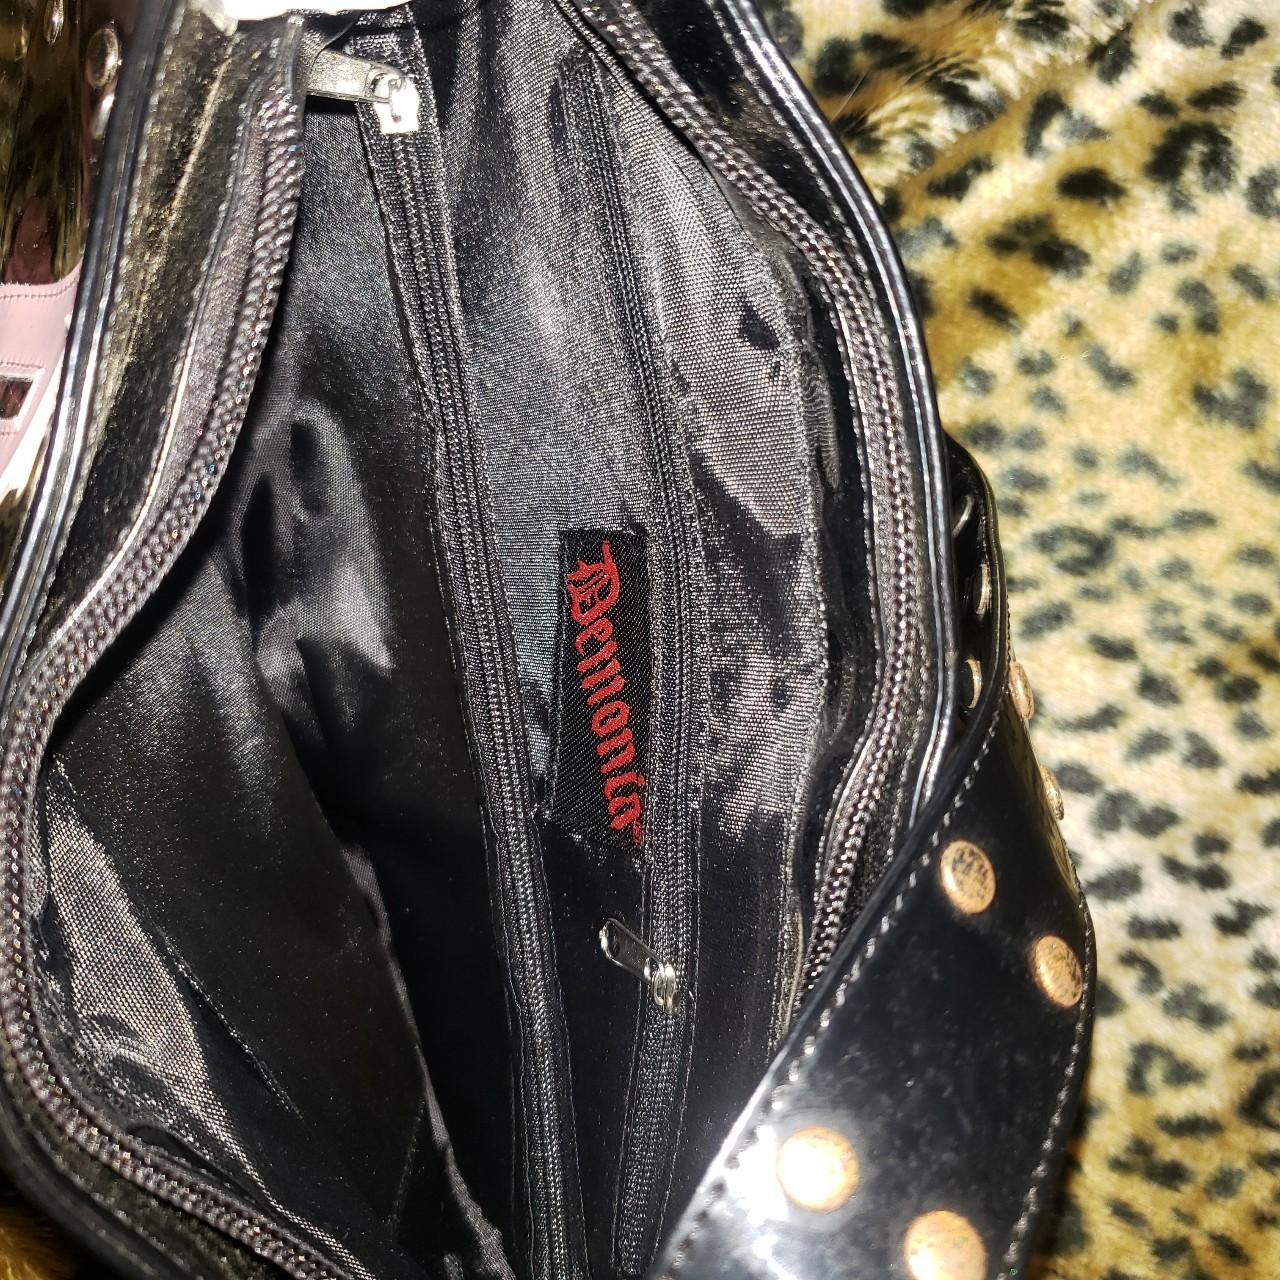 monogram y2k bag, some scuffing but in good - Depop